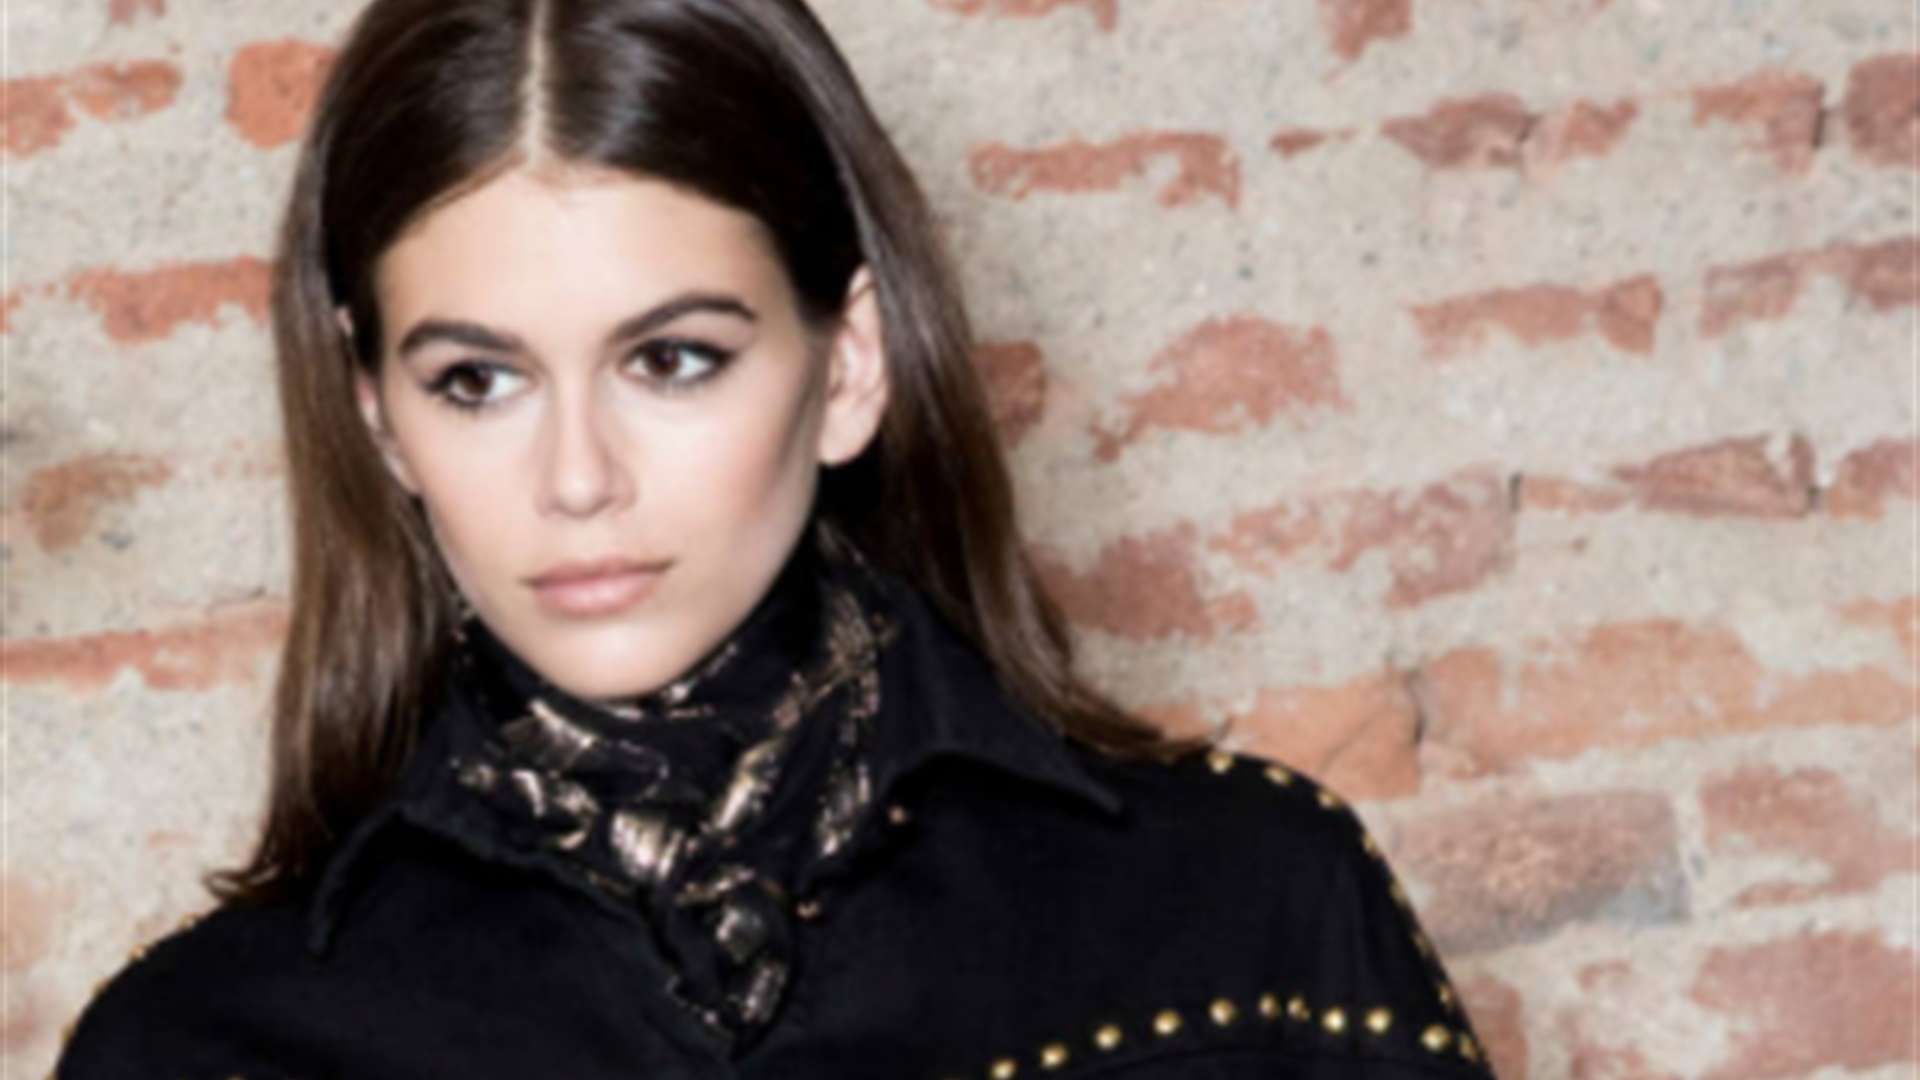 Kaia Gerber: the style of Cindy Crawford's daughter